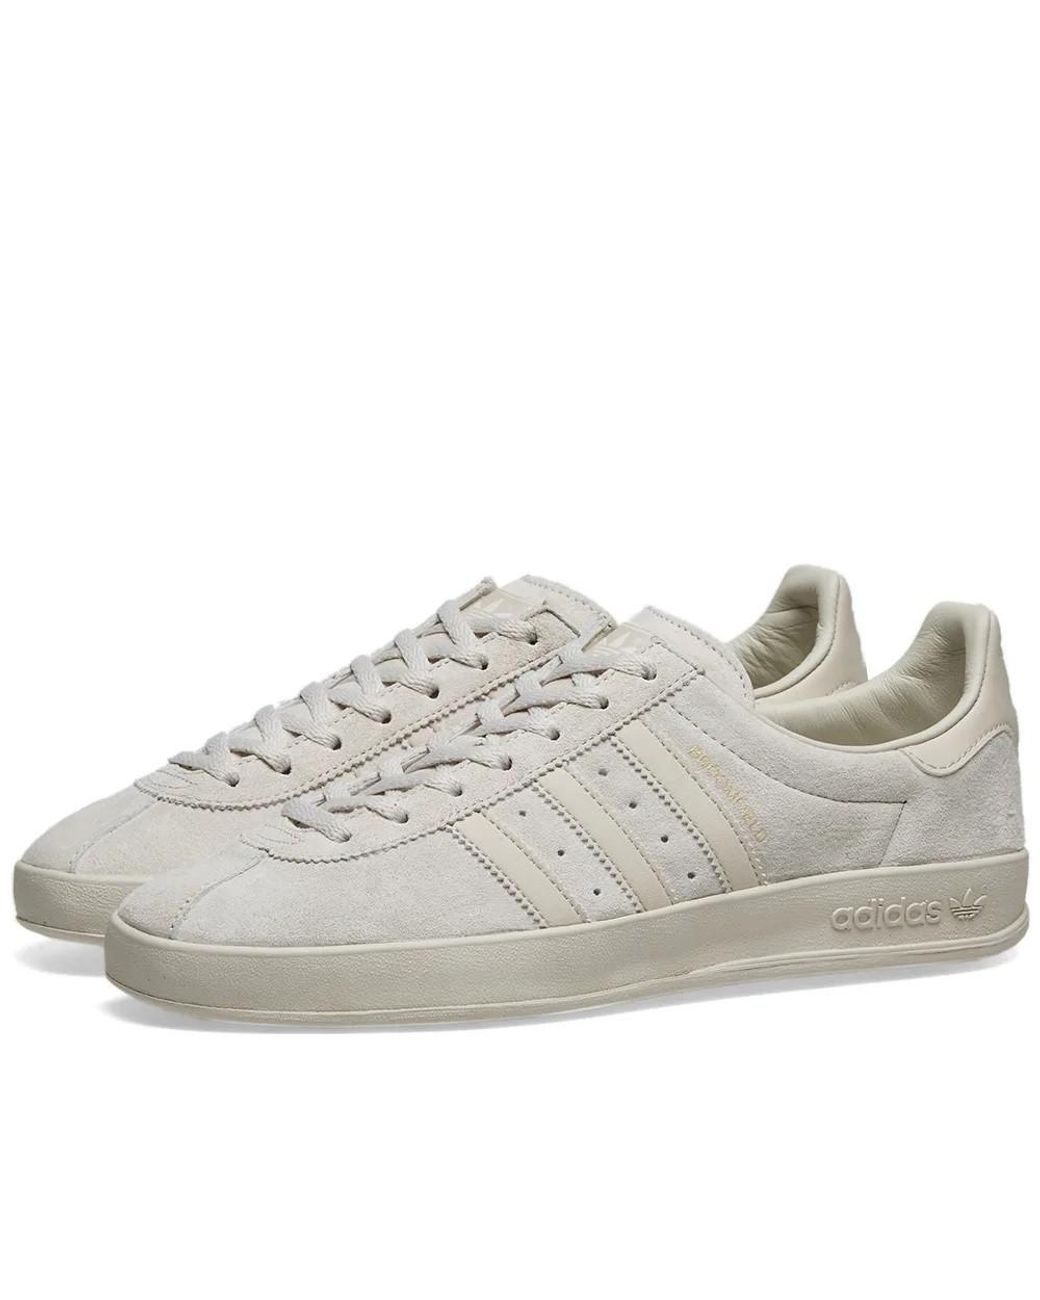 adidas Raw White Suede Leather Broomfield Shoes for Men - Lyst